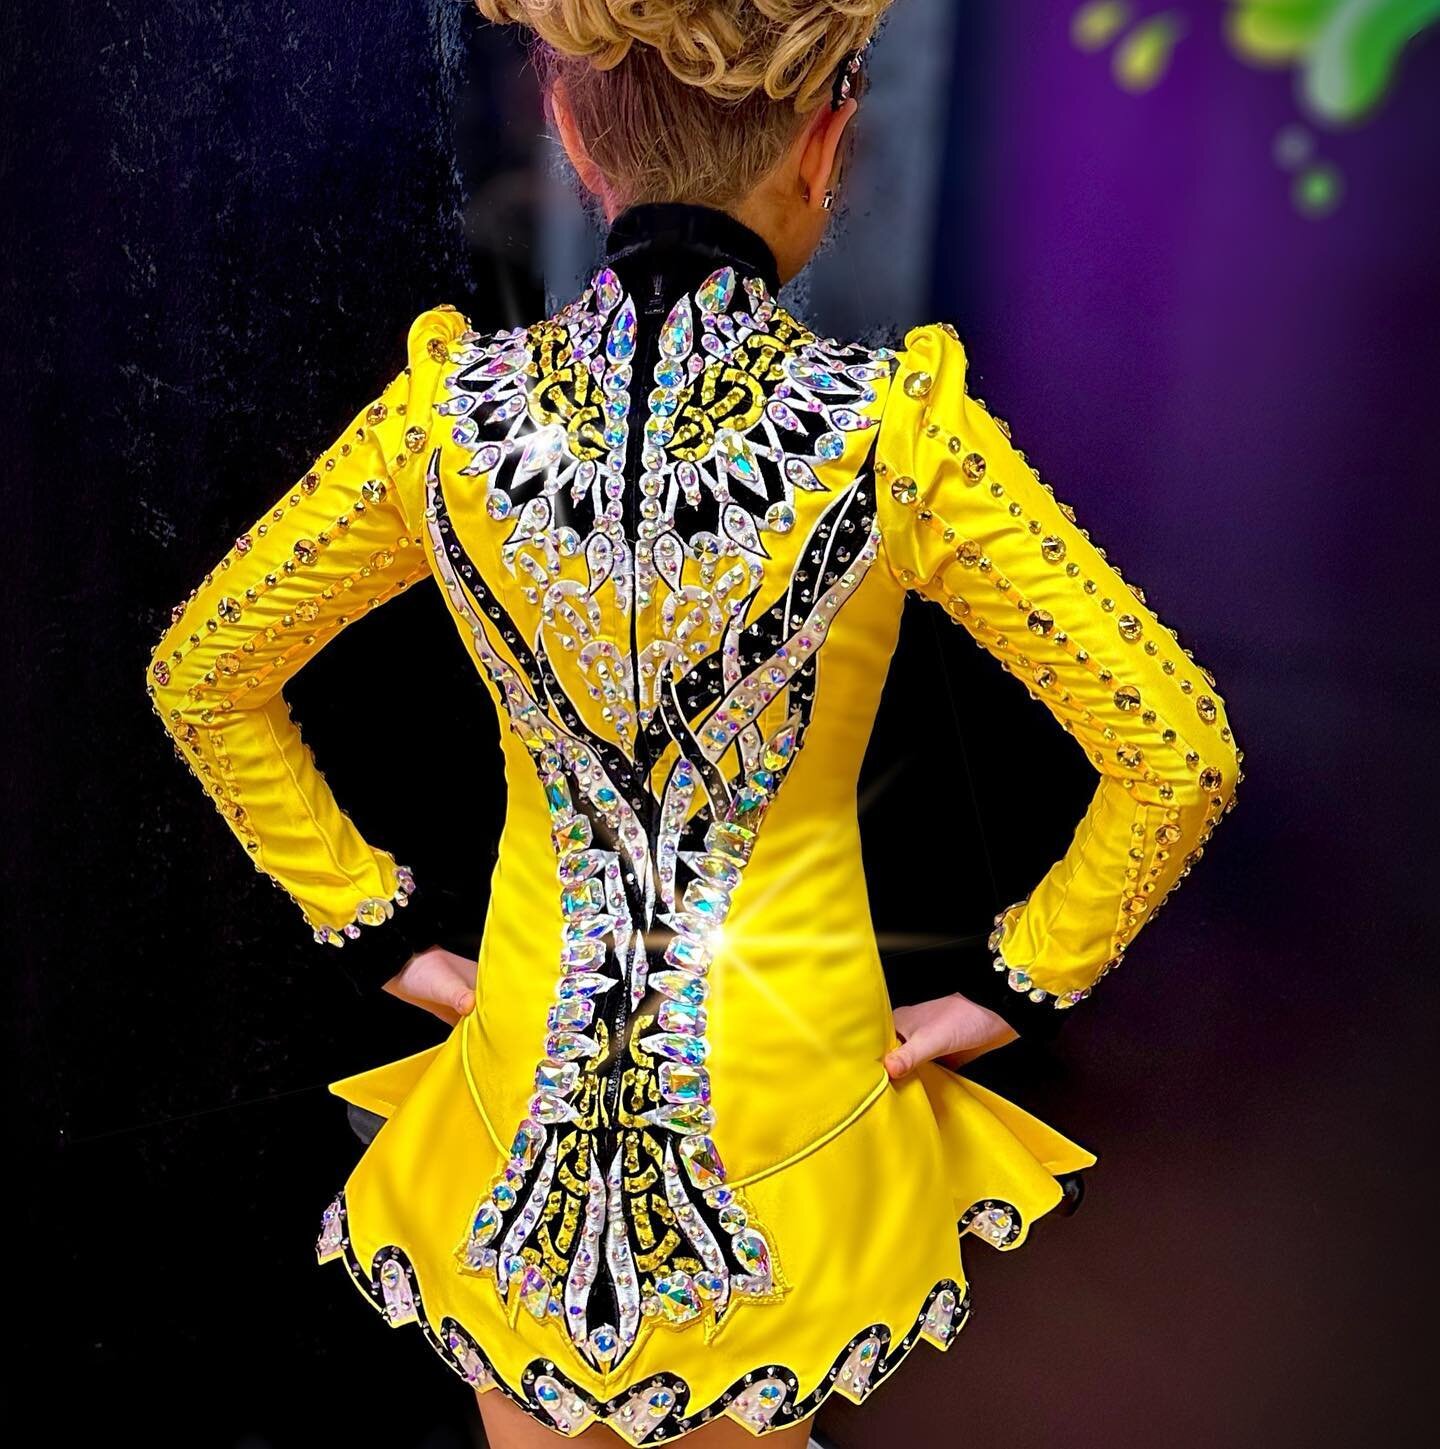 Lucy-Mae Catney
@theacademyirishdance 

Consider Rising Star for your next Costume by getting in touch for a free no obligation quote today. We specialise in Unique Costumes for all dancers worldwide. 

Accepting orders for delivery/fitting May 2023 